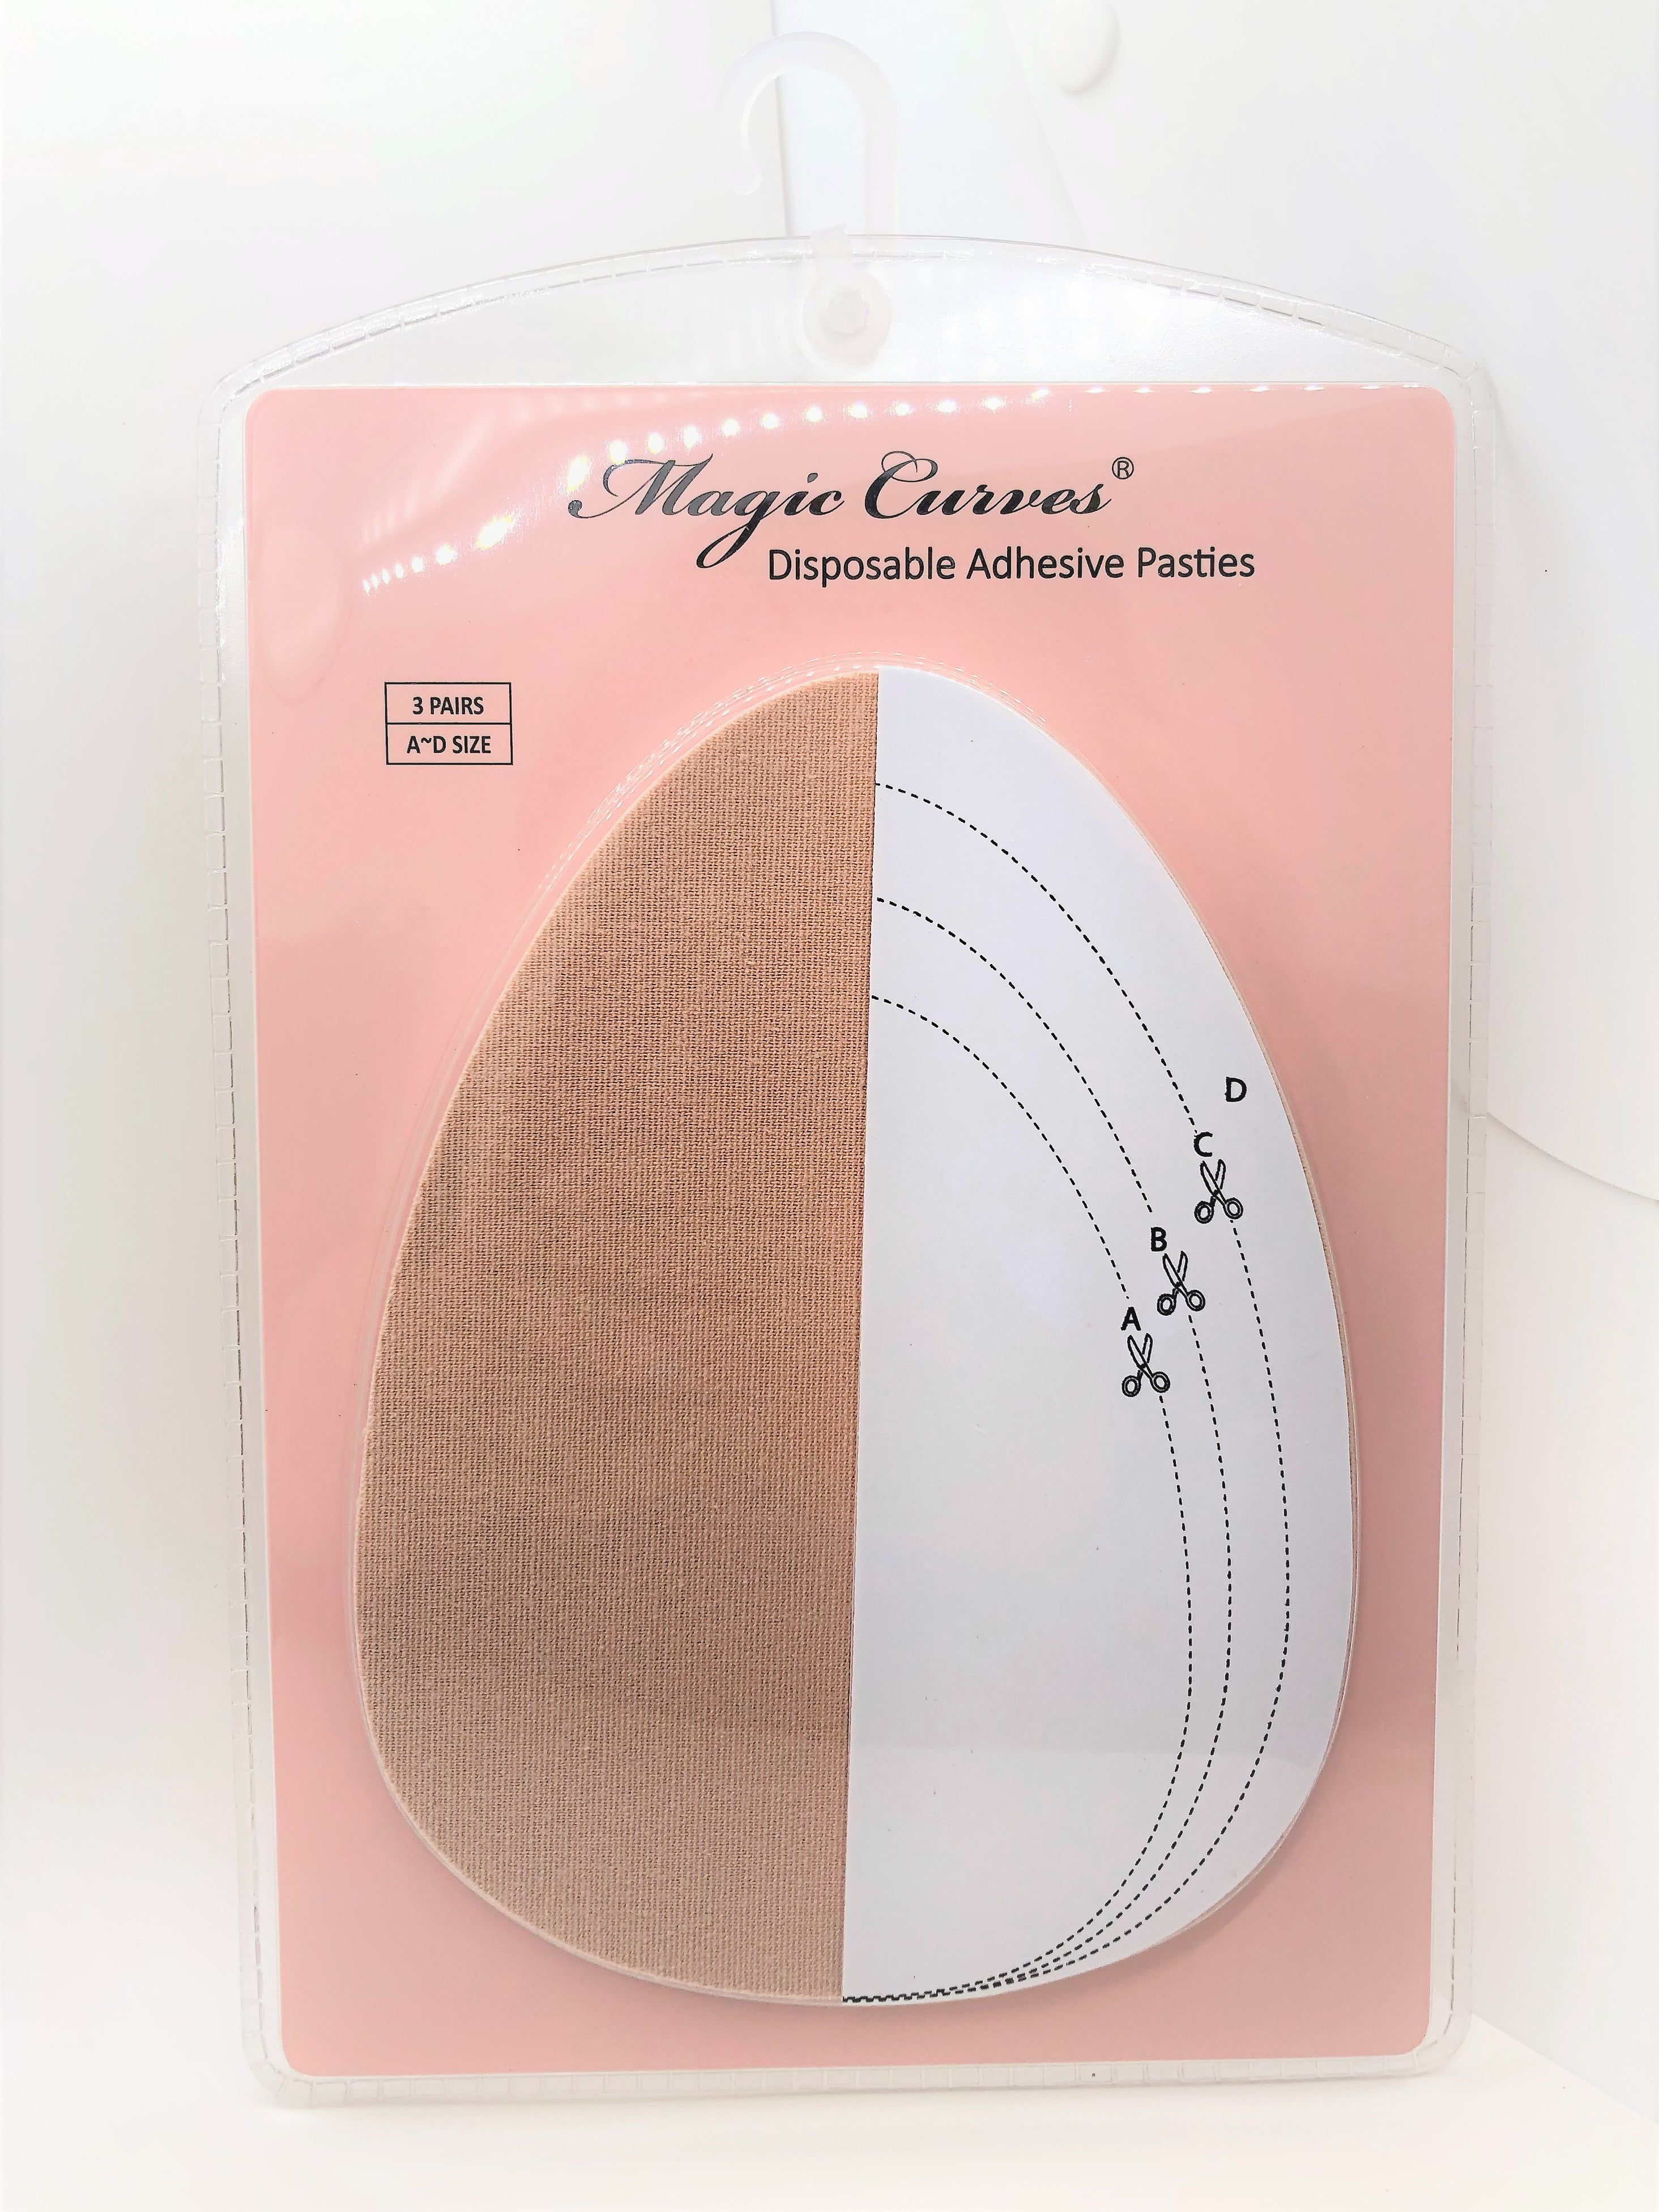 MAGIC CURVES DISPOSABLE ADHESIVE PASTIES ( 3 PAIRS ) CUT SIZES A~D